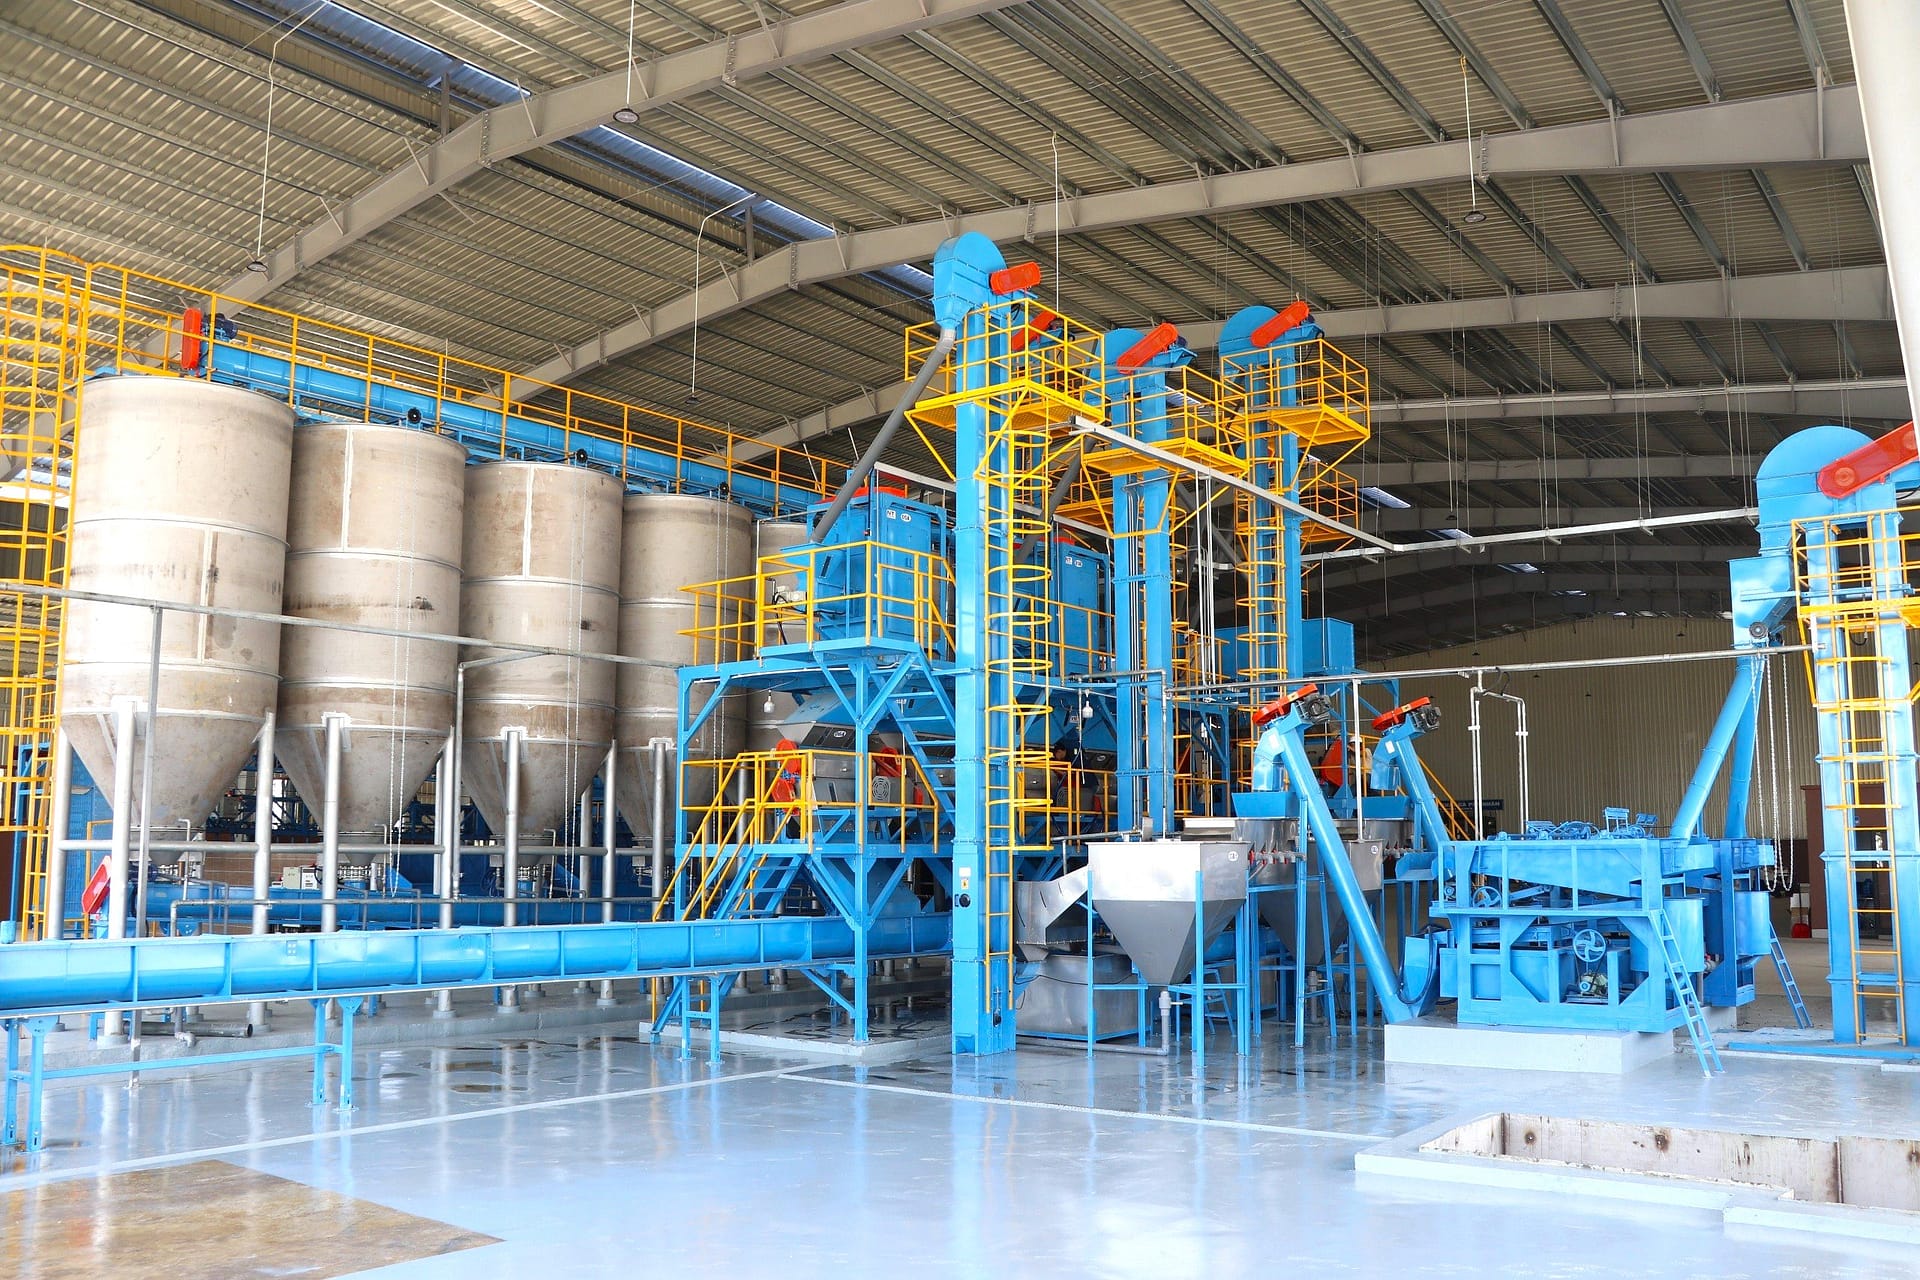 Wet coffee bean processing system, capacity of 15-20 tons per hour